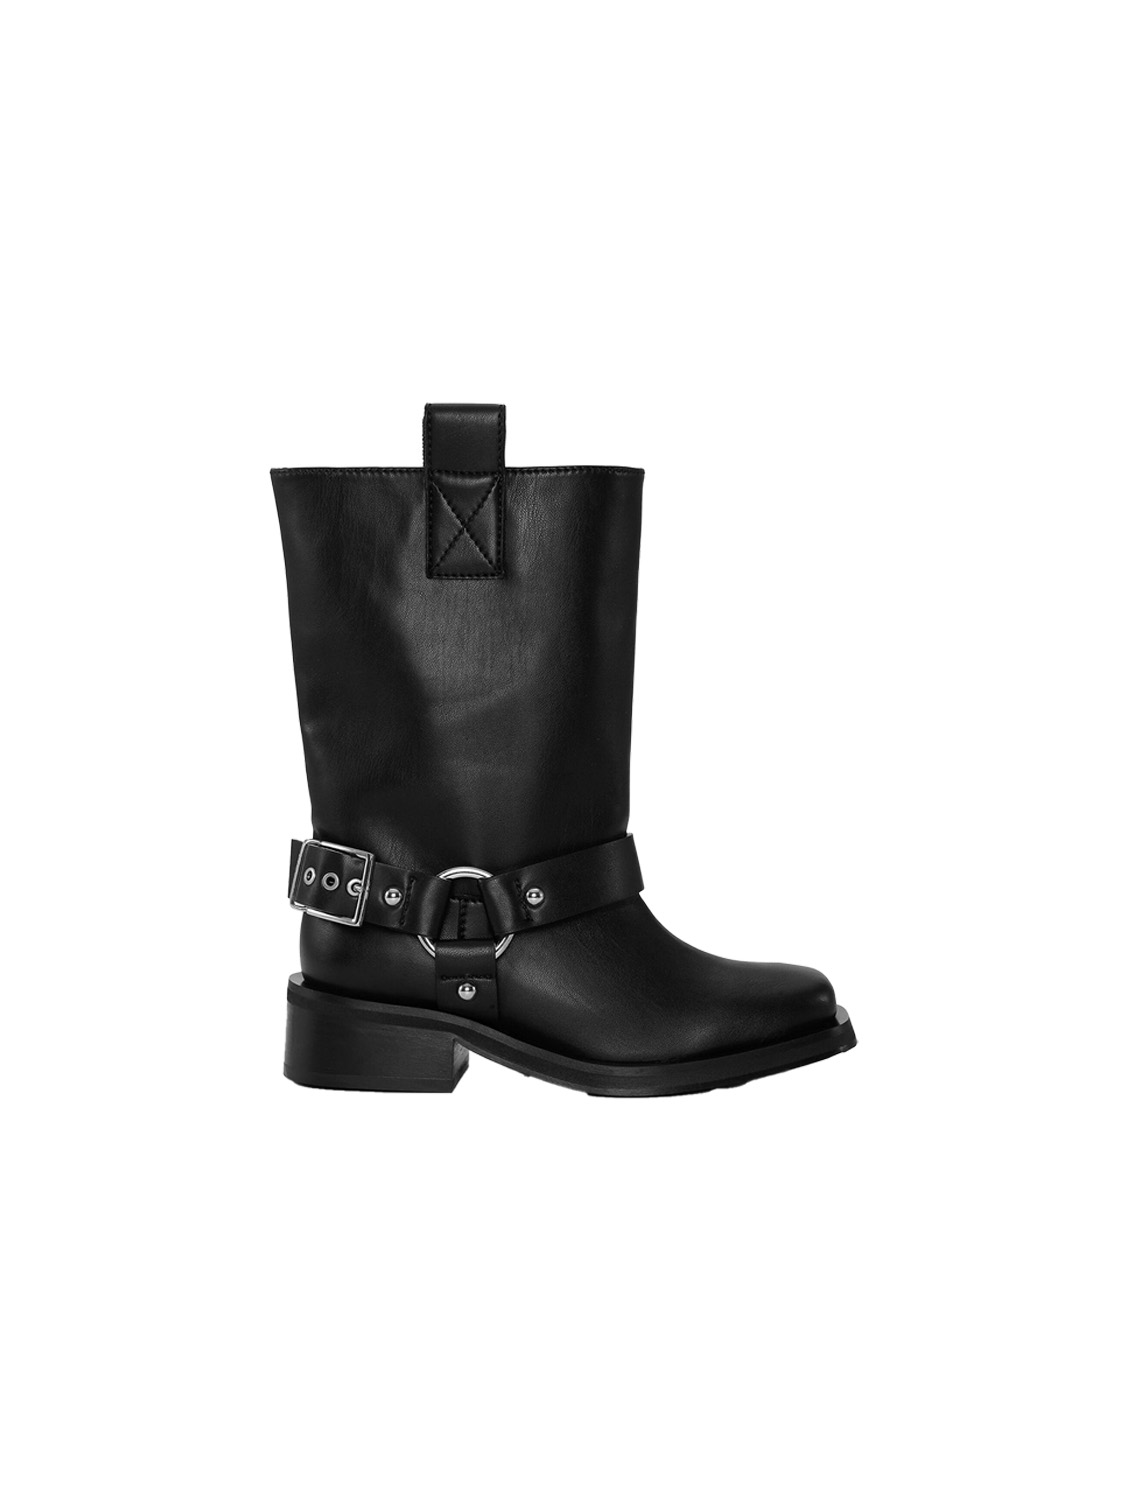 Biker boots made from recycled leather 